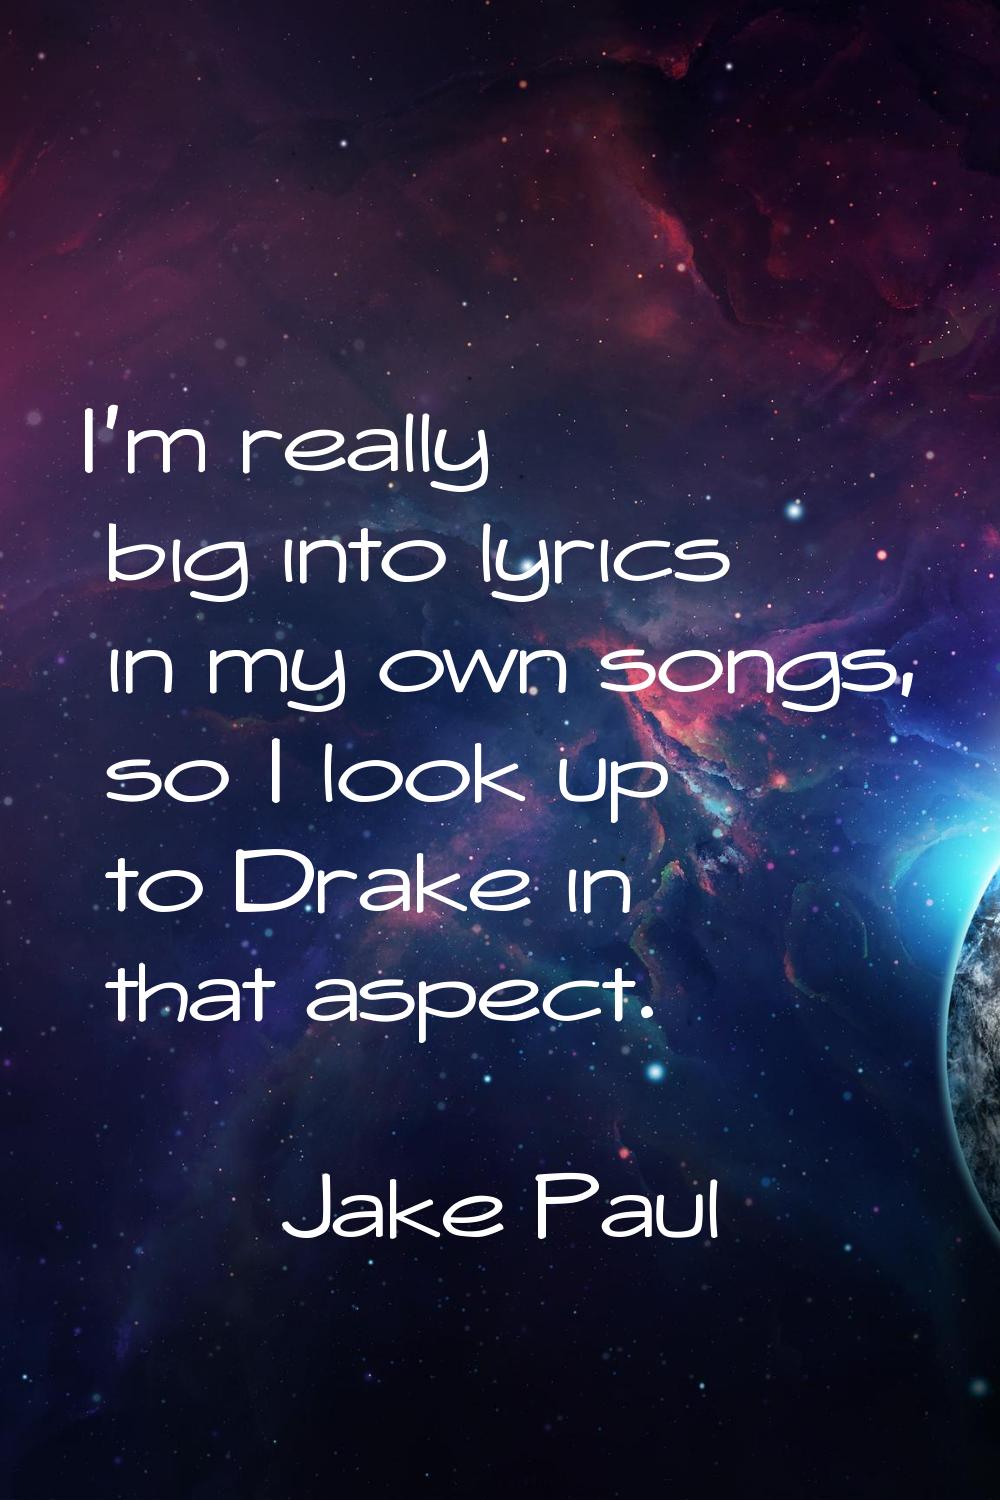 I'm really big into lyrics in my own songs, so I look up to Drake in that aspect.